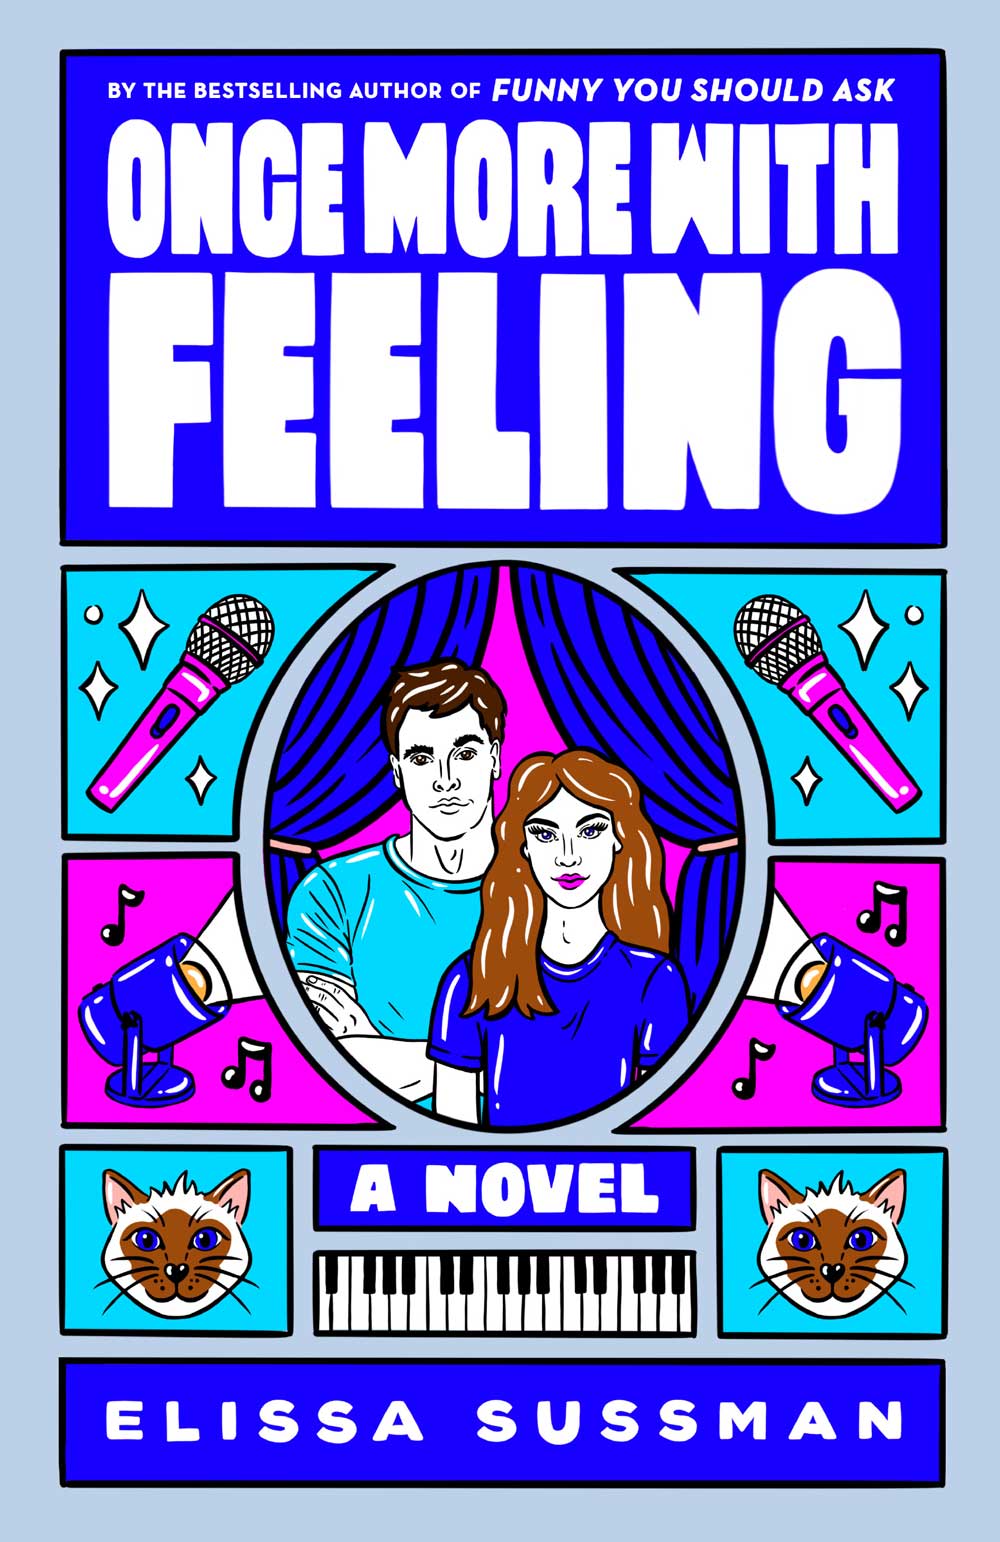 Book cover of Once More with Feeling. An illustration of a man and a woman in the middle, surrounded by illustrations of microphones, spotlights, a piano and a cat.